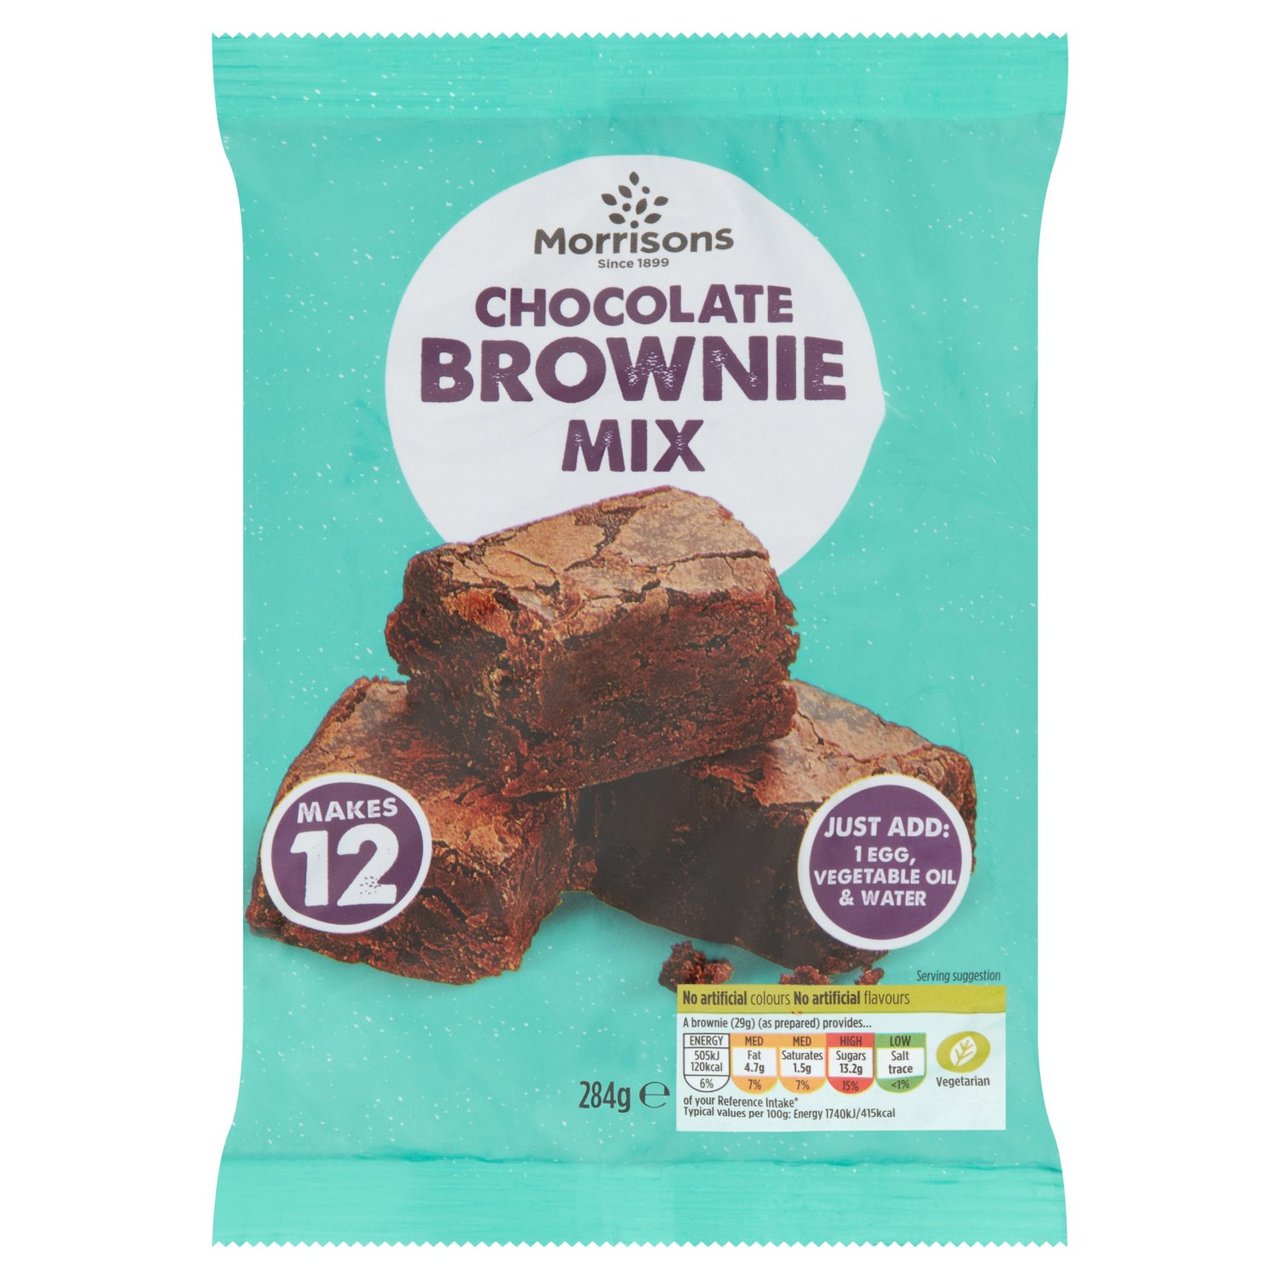 Morrisons Chocolate Brownie Mix 284g